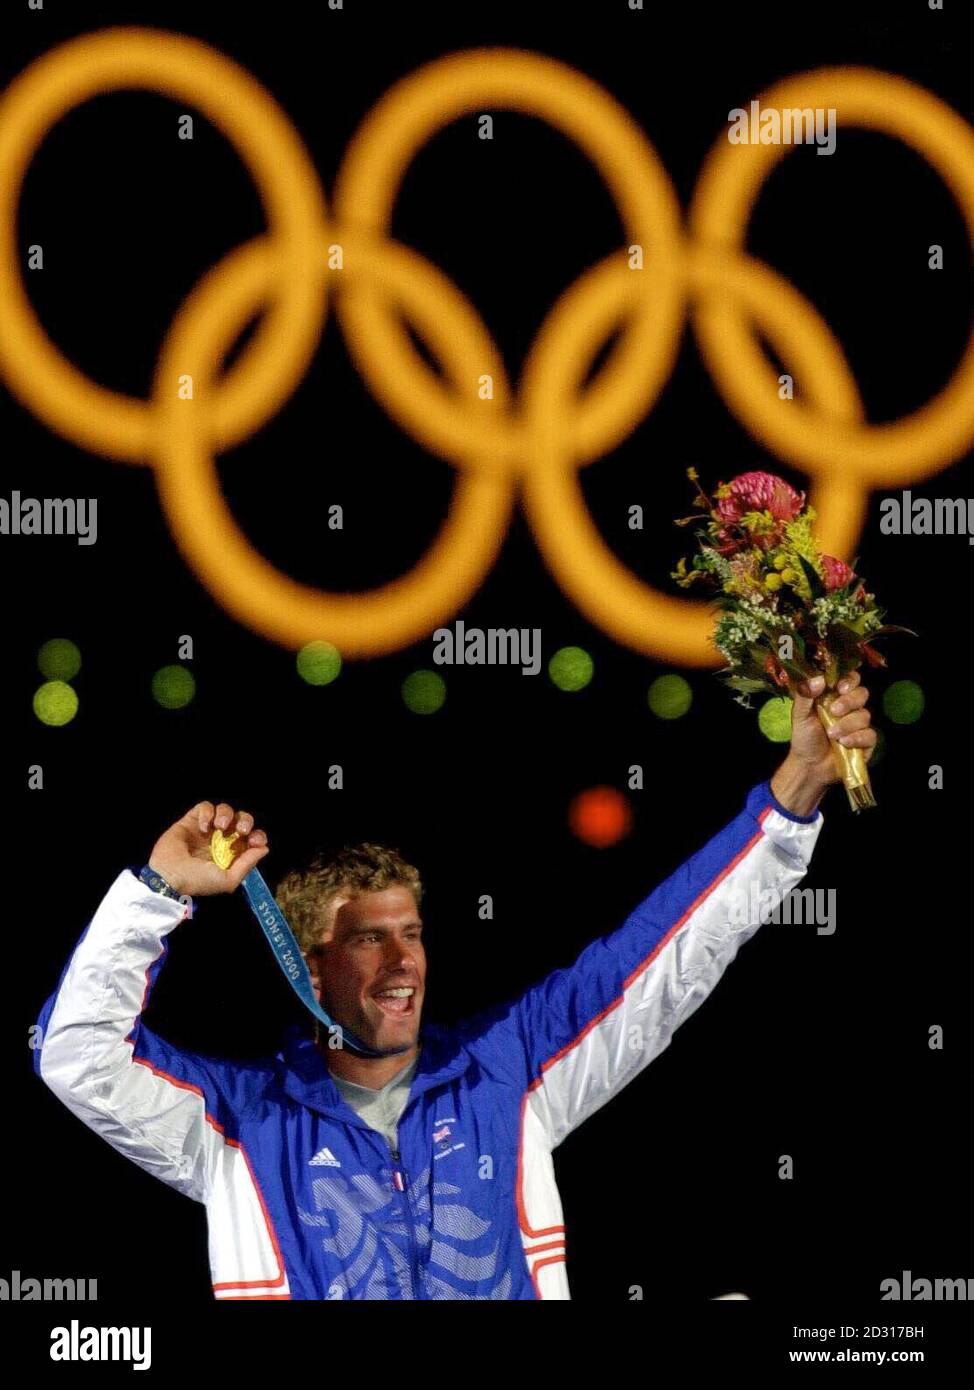 Great Britain's Gold medallist Iain Percy celebrates his Olympic Games success in front of the Harbour Bridge, in Sydney, Australia. Percy won his Gold Medal in the Men's Finn Sailing Class. Stock Photo